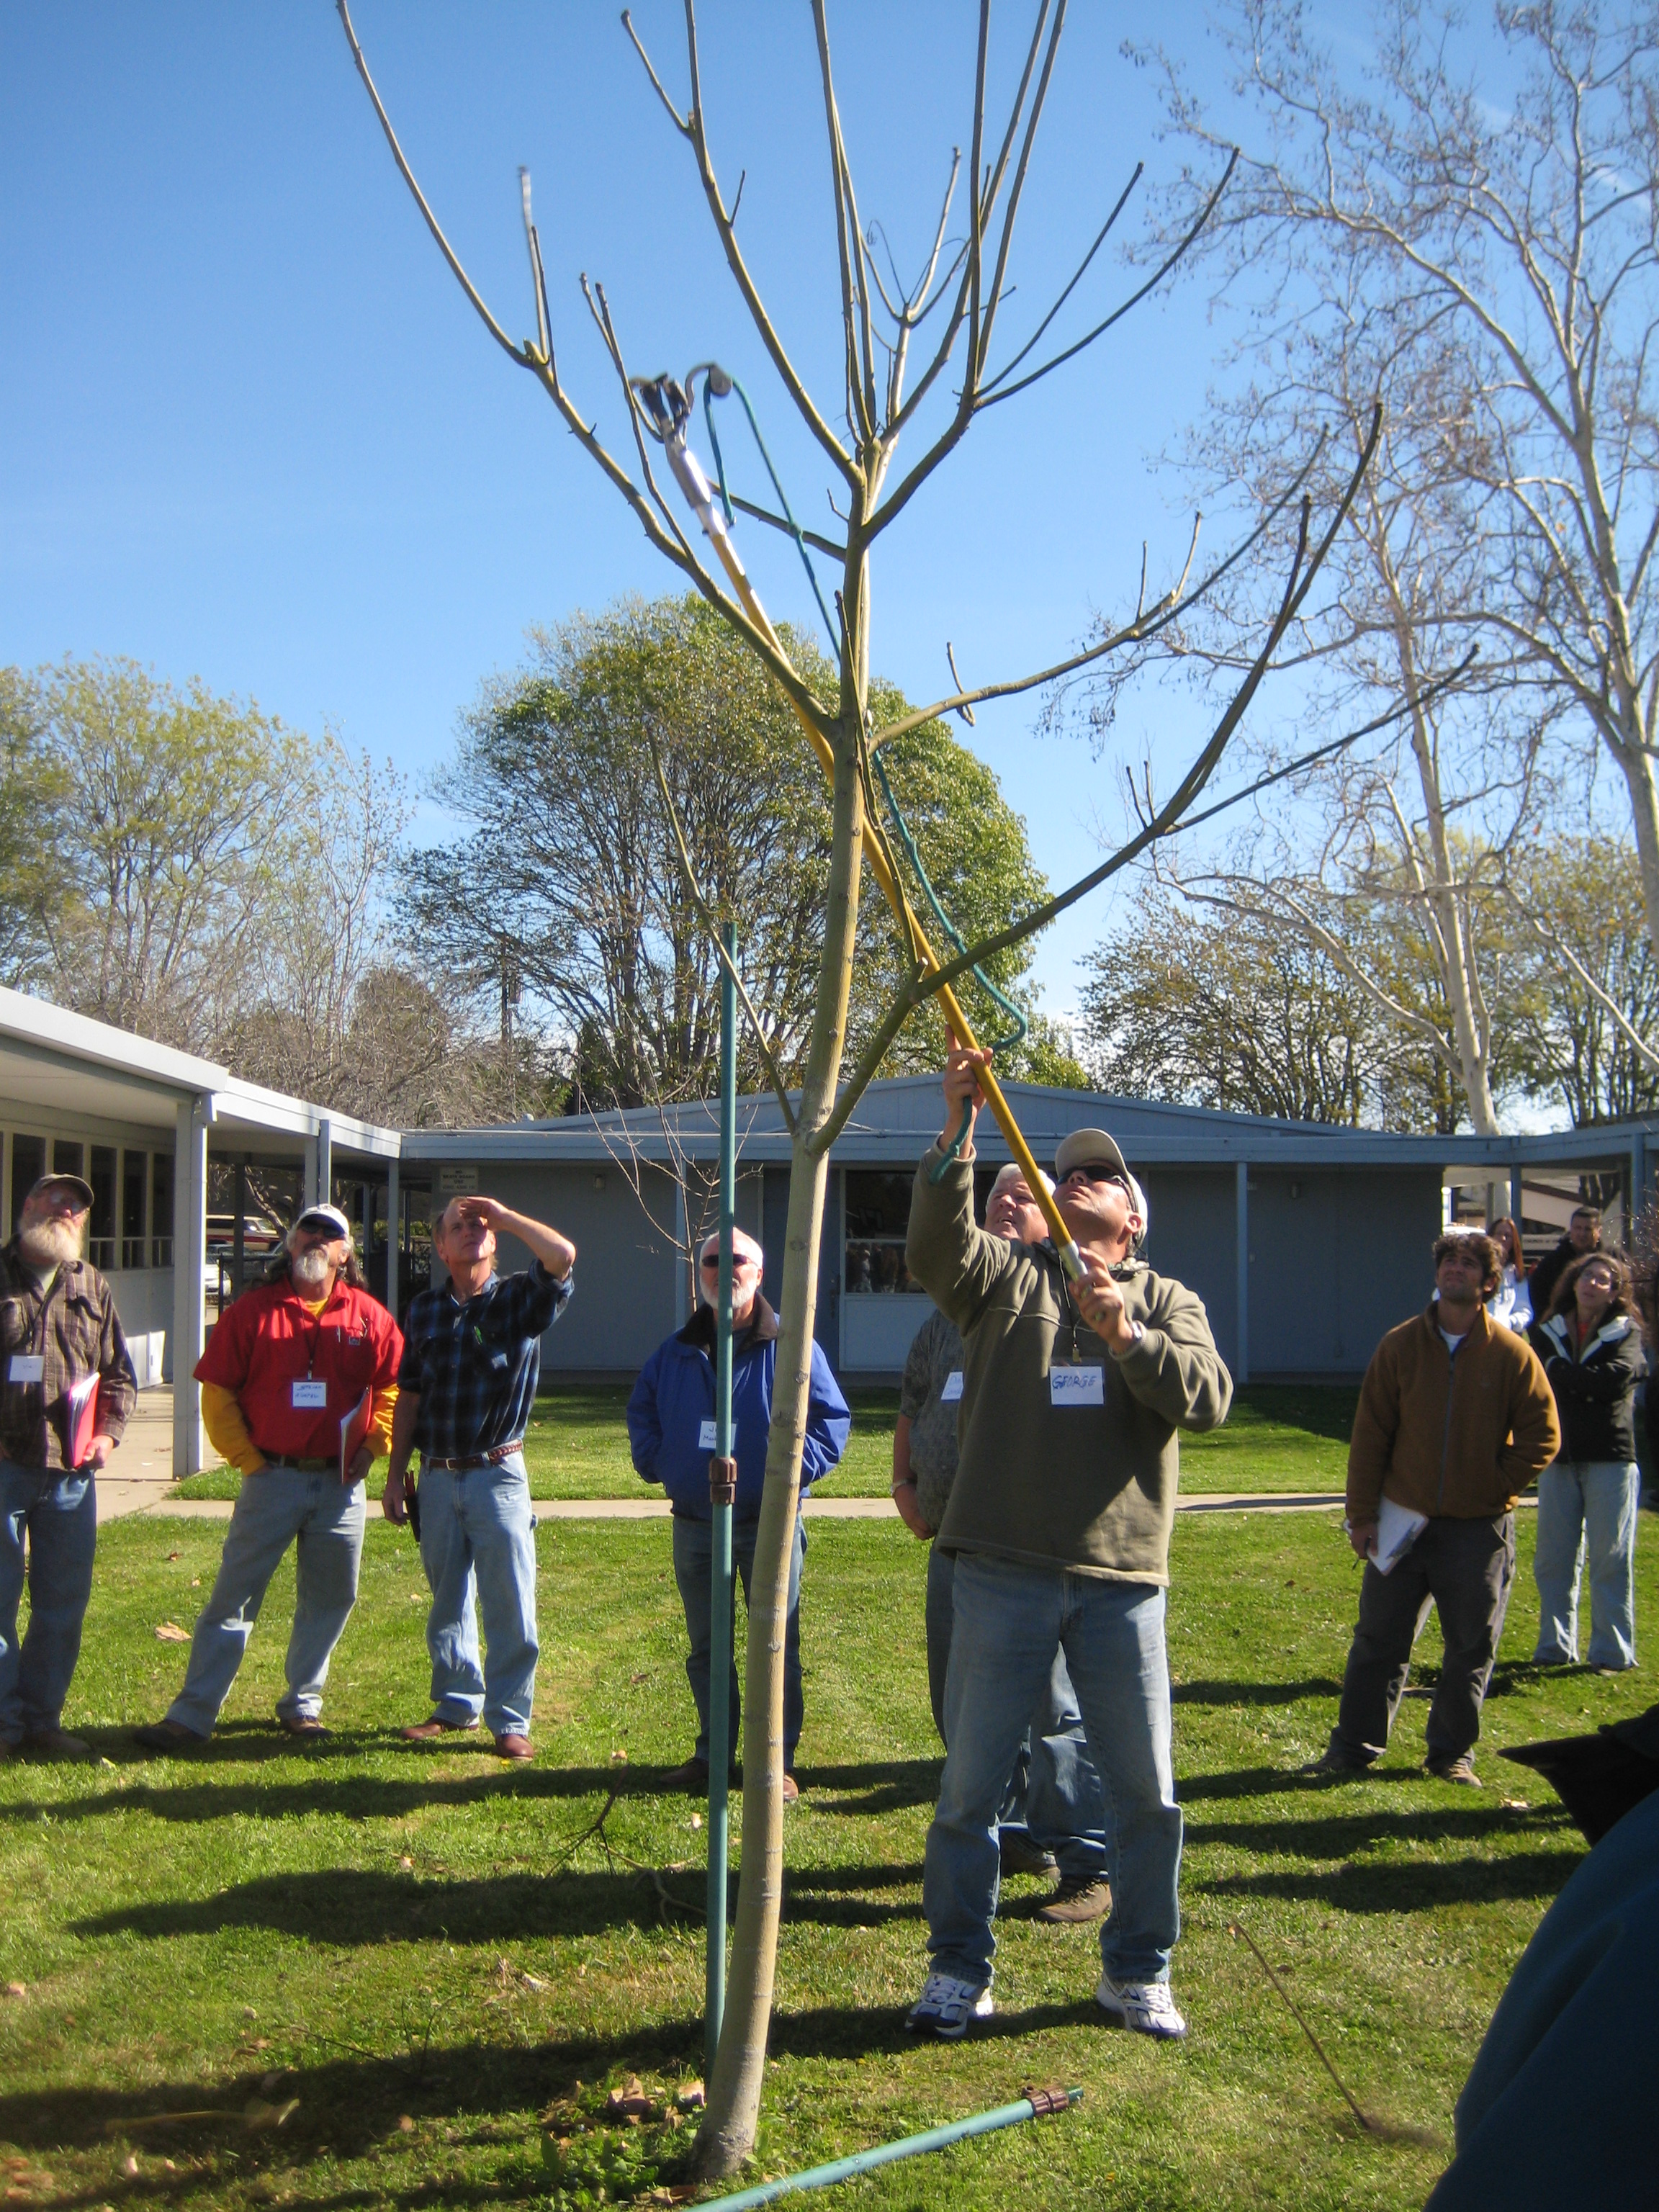 Learn to Prune Trees the Right Way, Young Tree Care Workshop in Goleta on January 21st